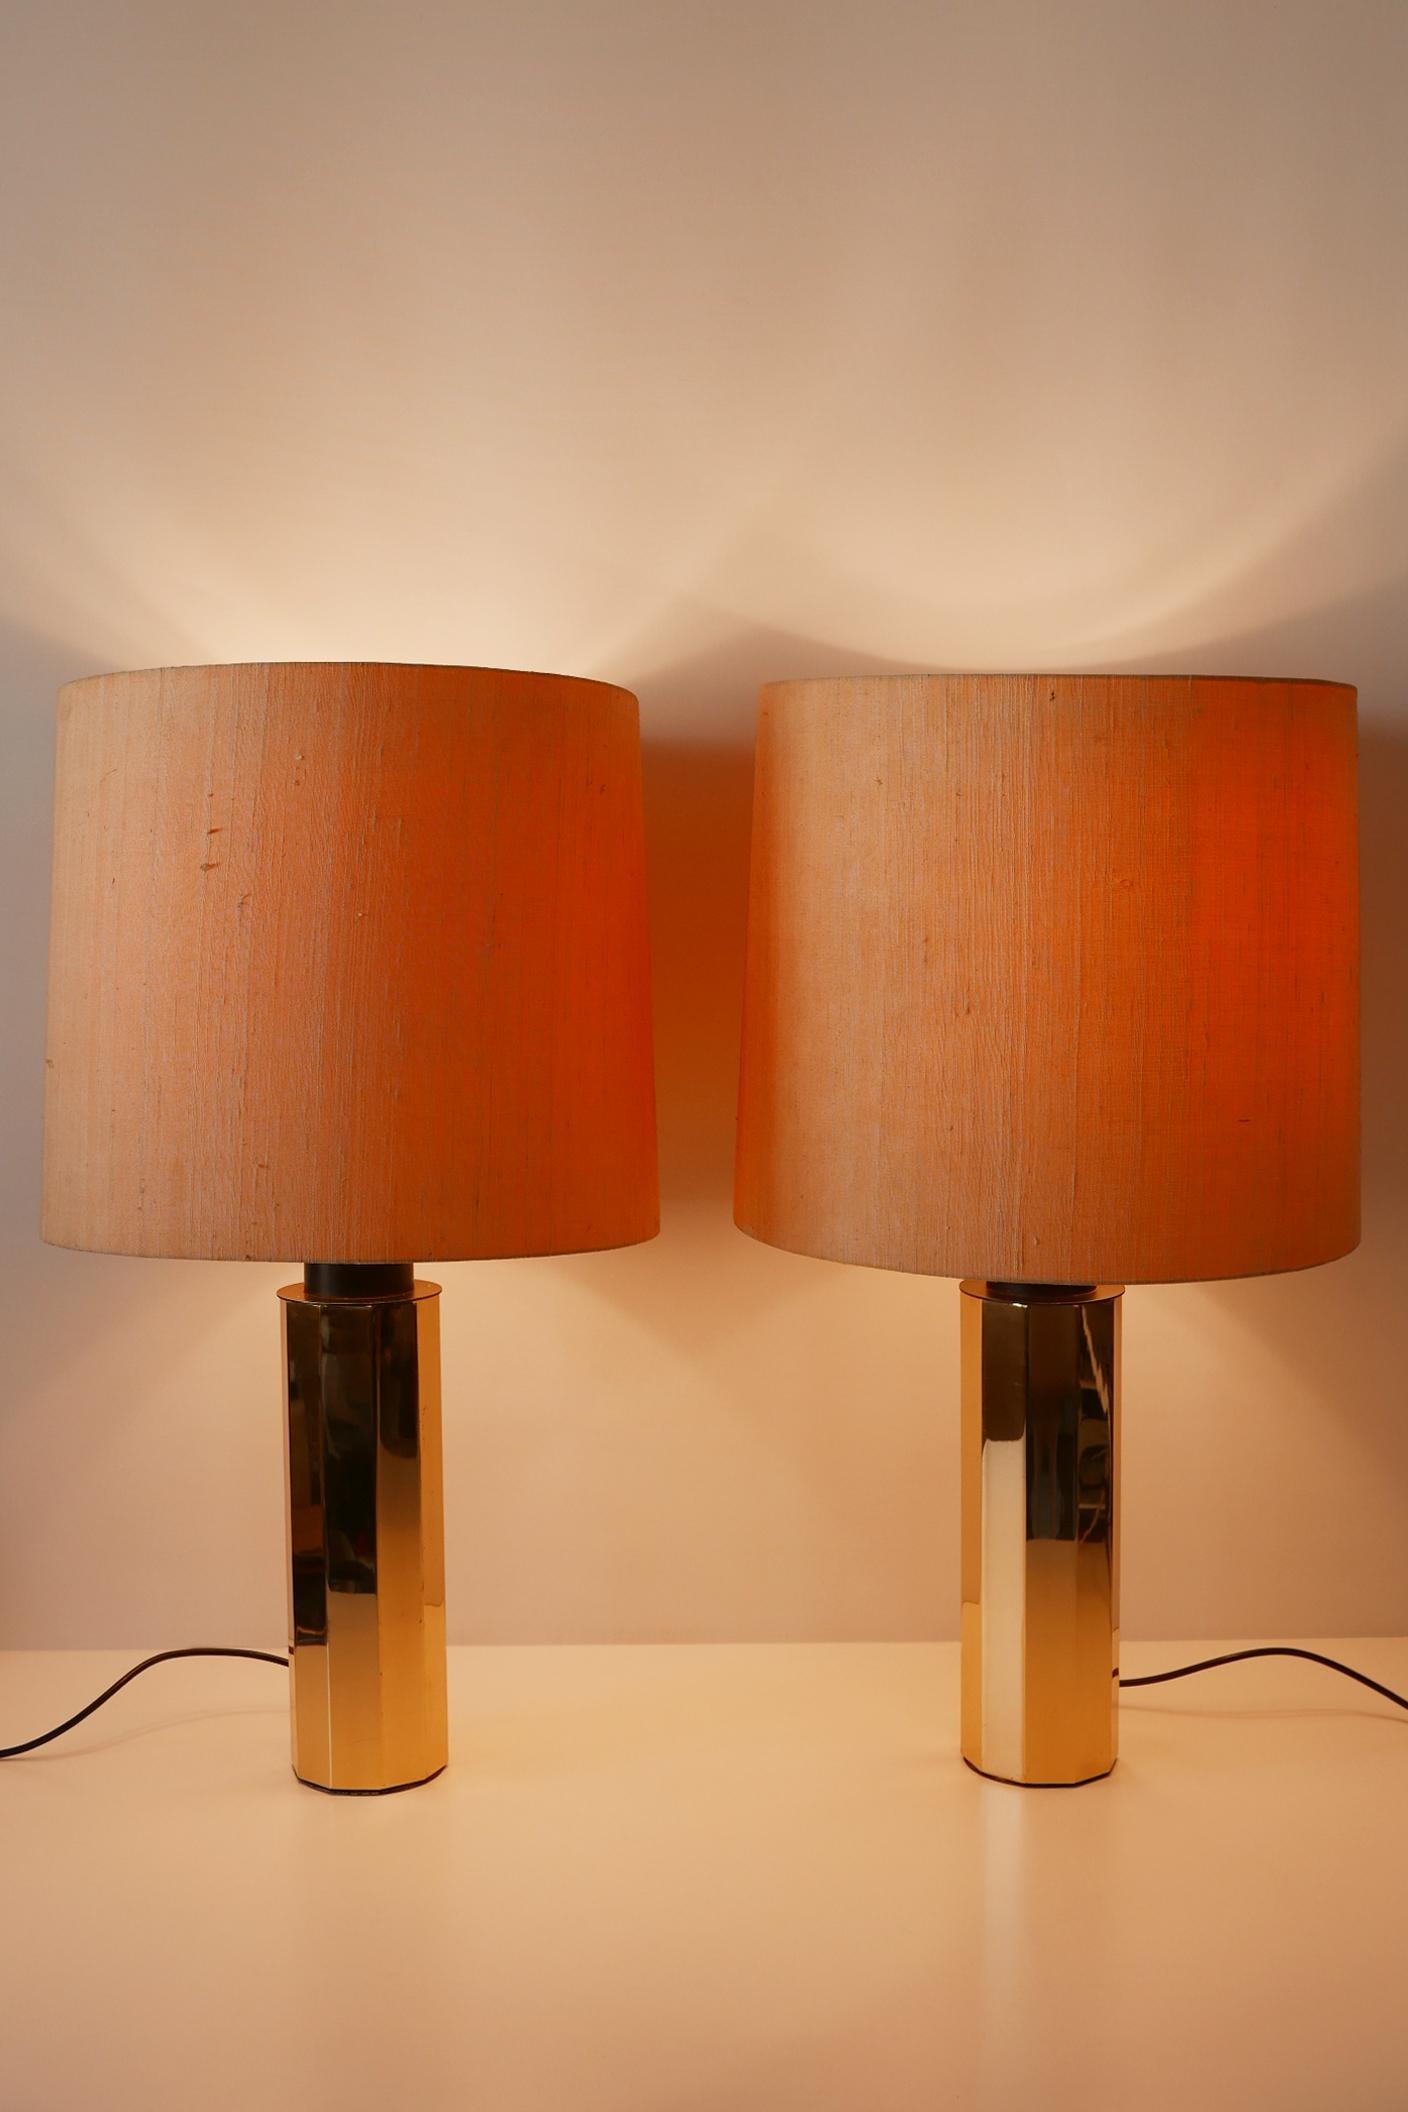 Set of Two Huge, 5-Flamed Midcentury Decagonal Brass Table Lamps, 1960s, Germany For Sale 1